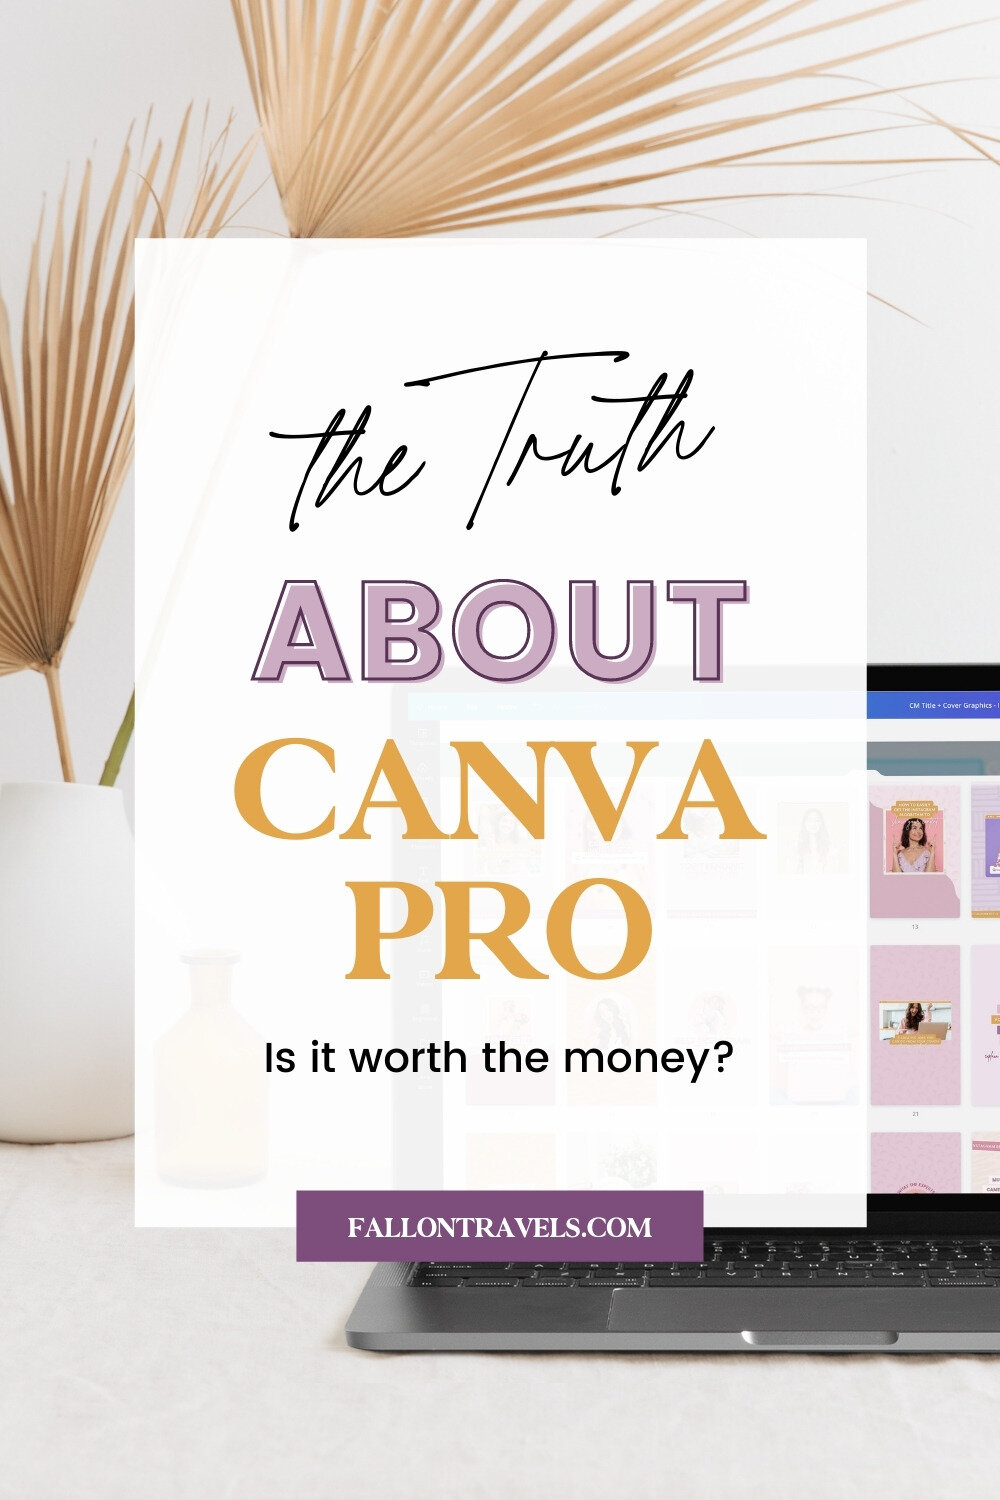 Canva Pro Review - Is it worth the money? | Fallon Travels